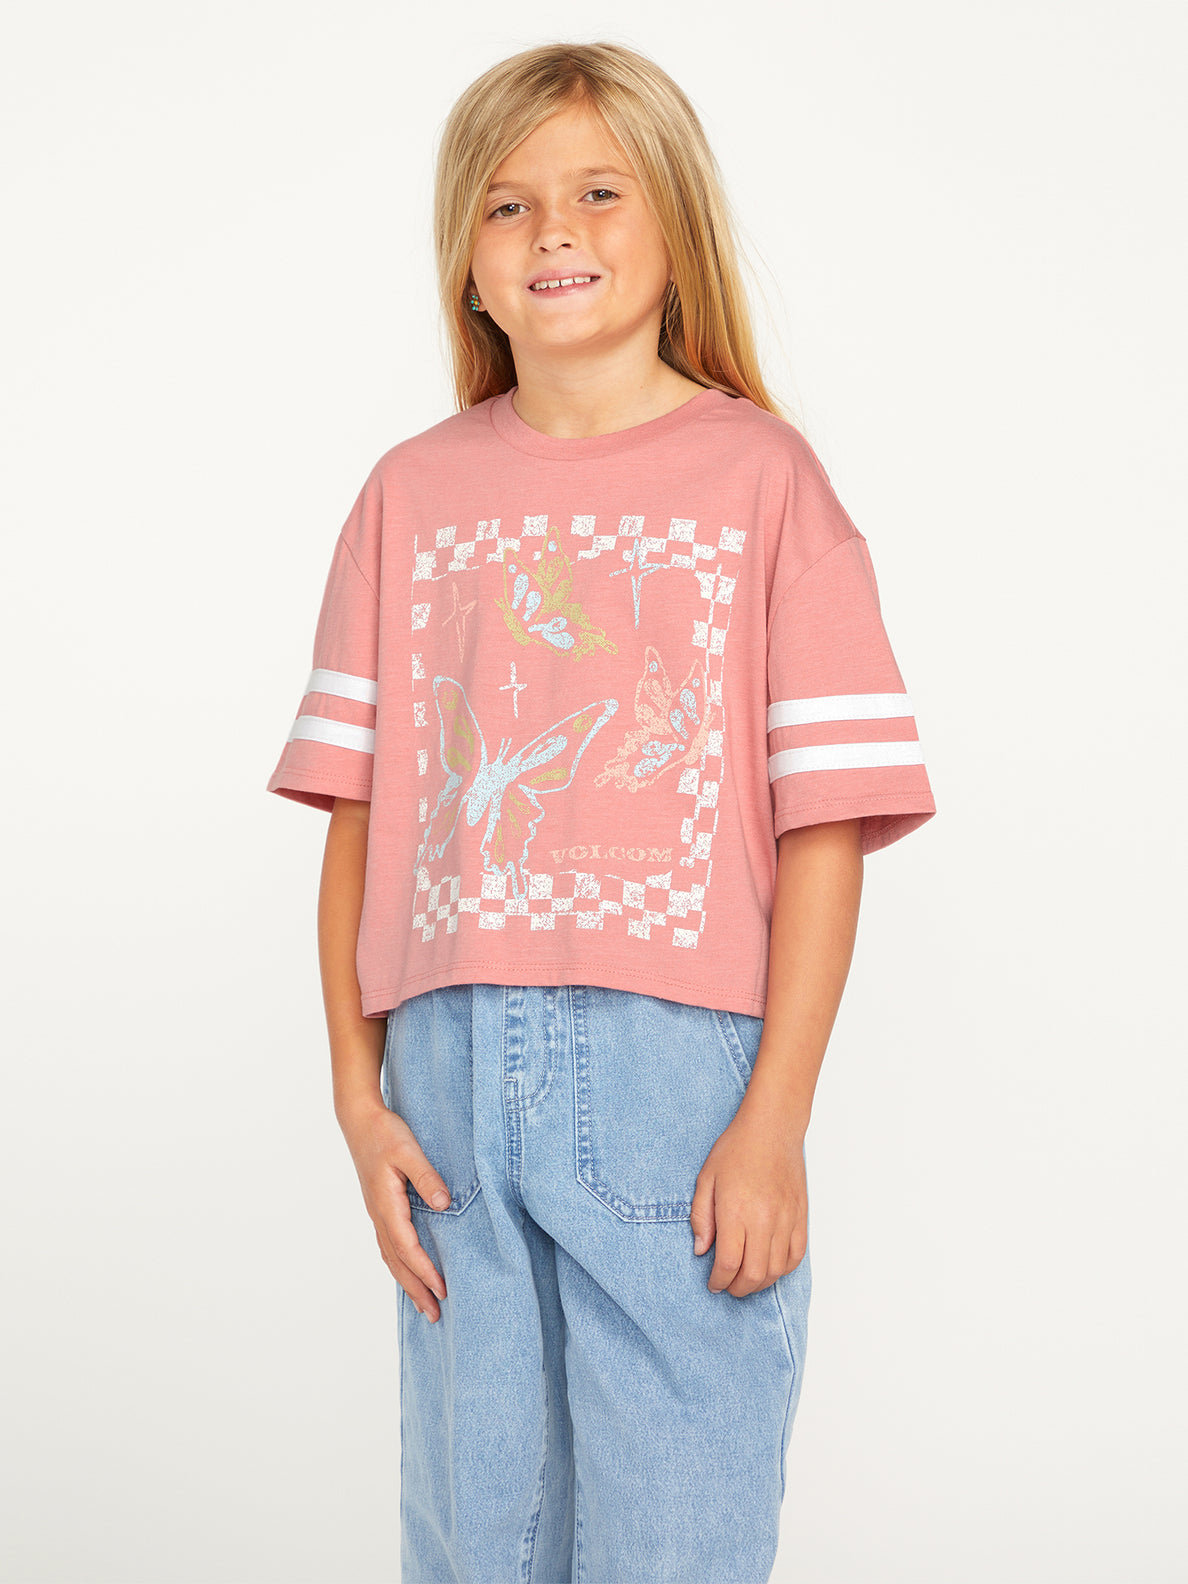 Girls Truly Stoked Tee - Desert Pink (R3512303_DSP) [3]